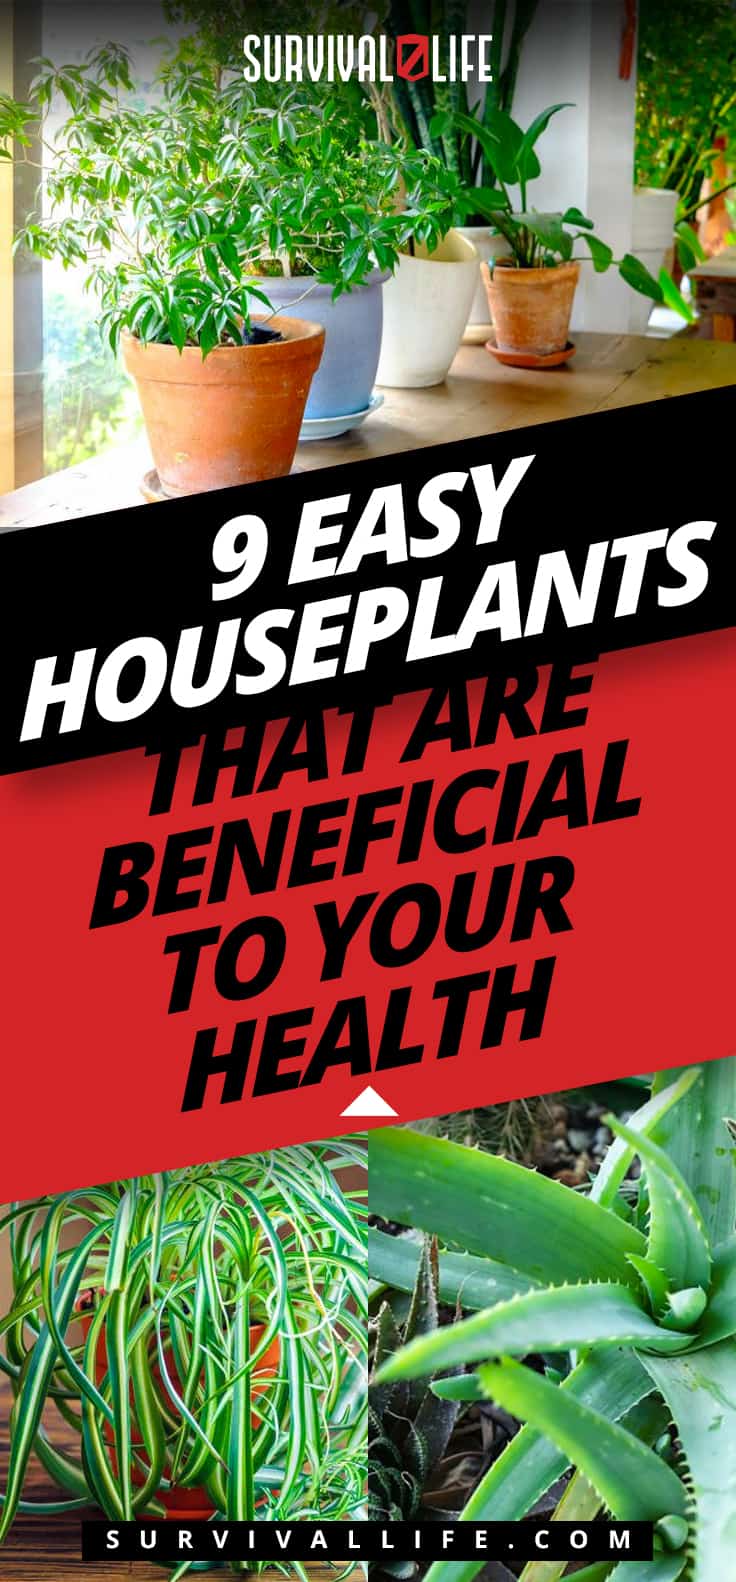 9 Easy Houseplants That Are Beneficial To Your Health